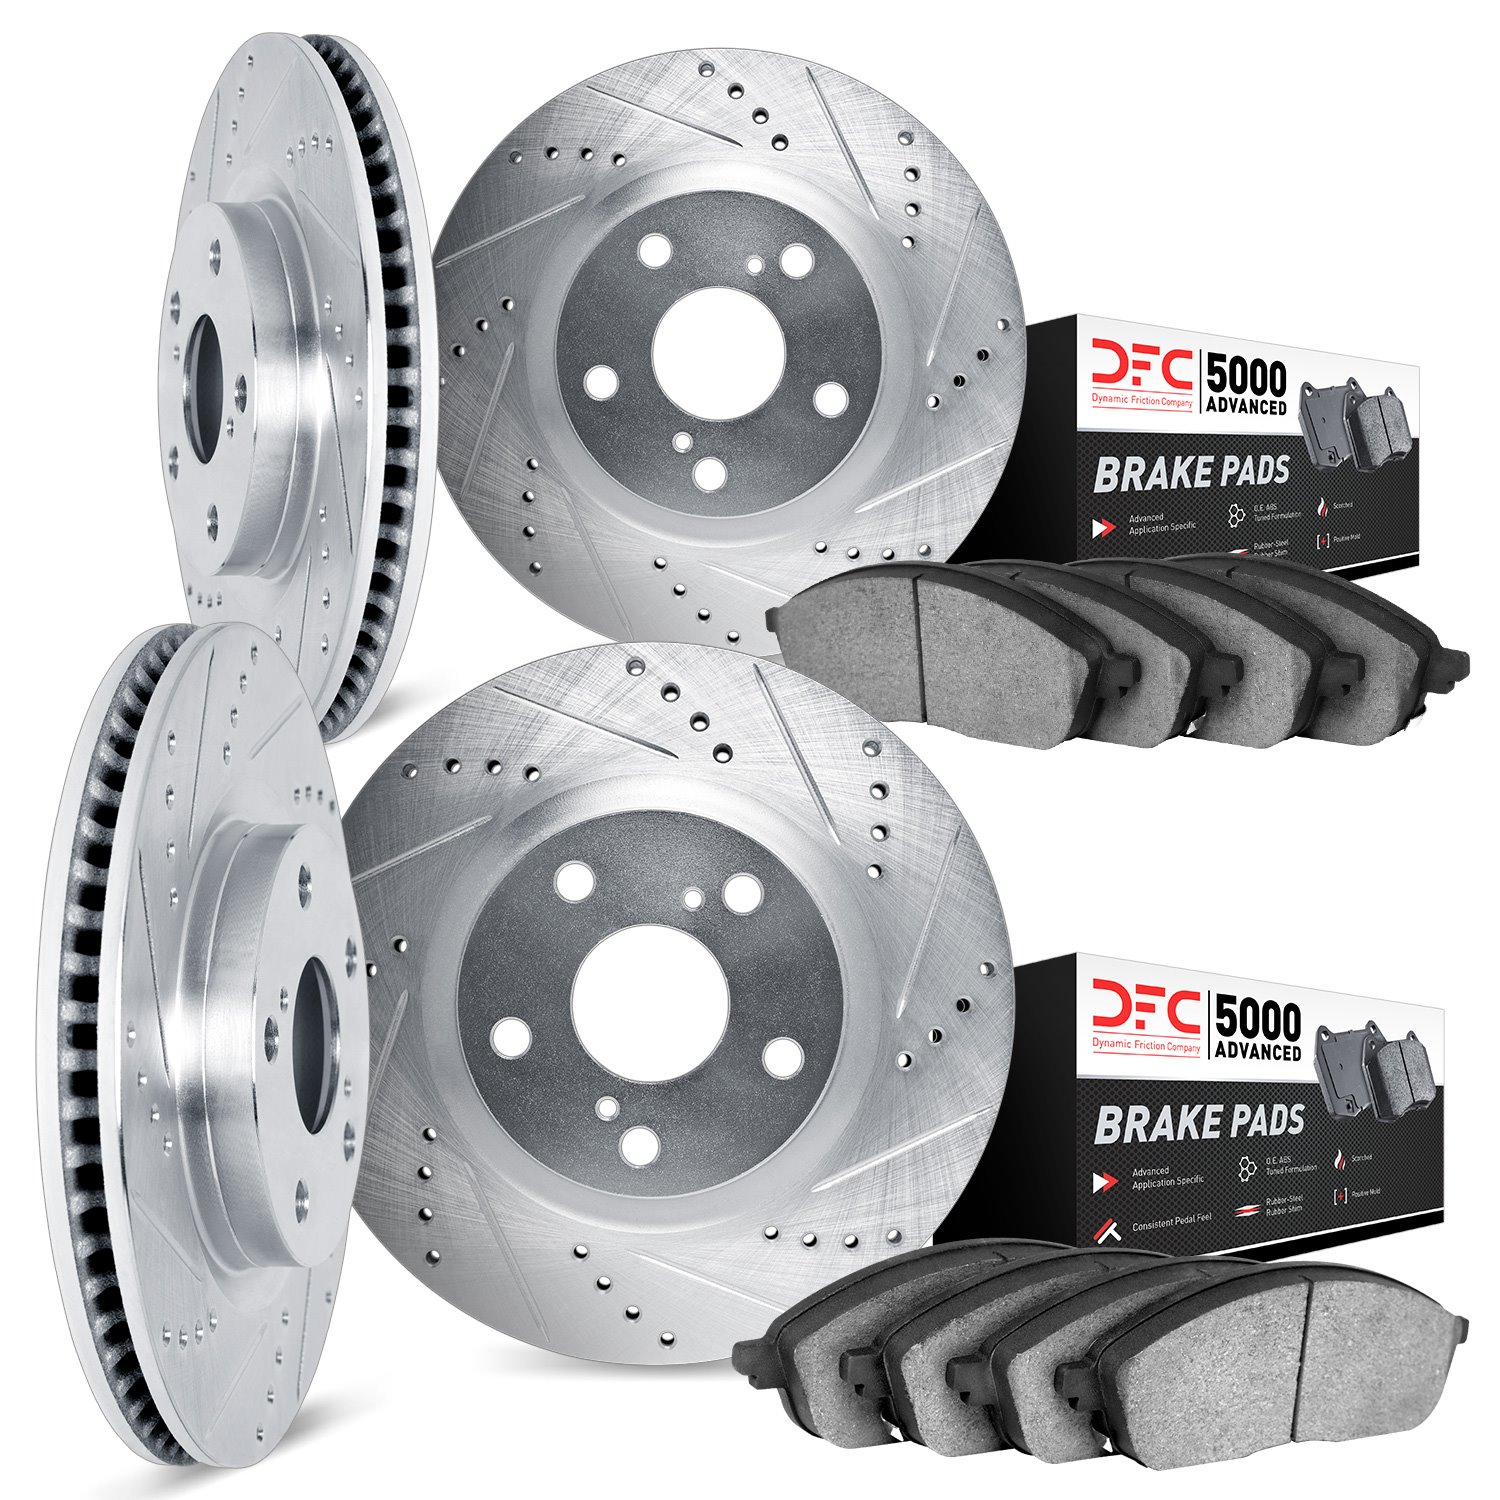 7504-02014 Drilled/Slotted Brake Rotors w/5000 Advanced Brake Pads Kit [Silver], 1991-1994 Porsche, Position: Front and Rear